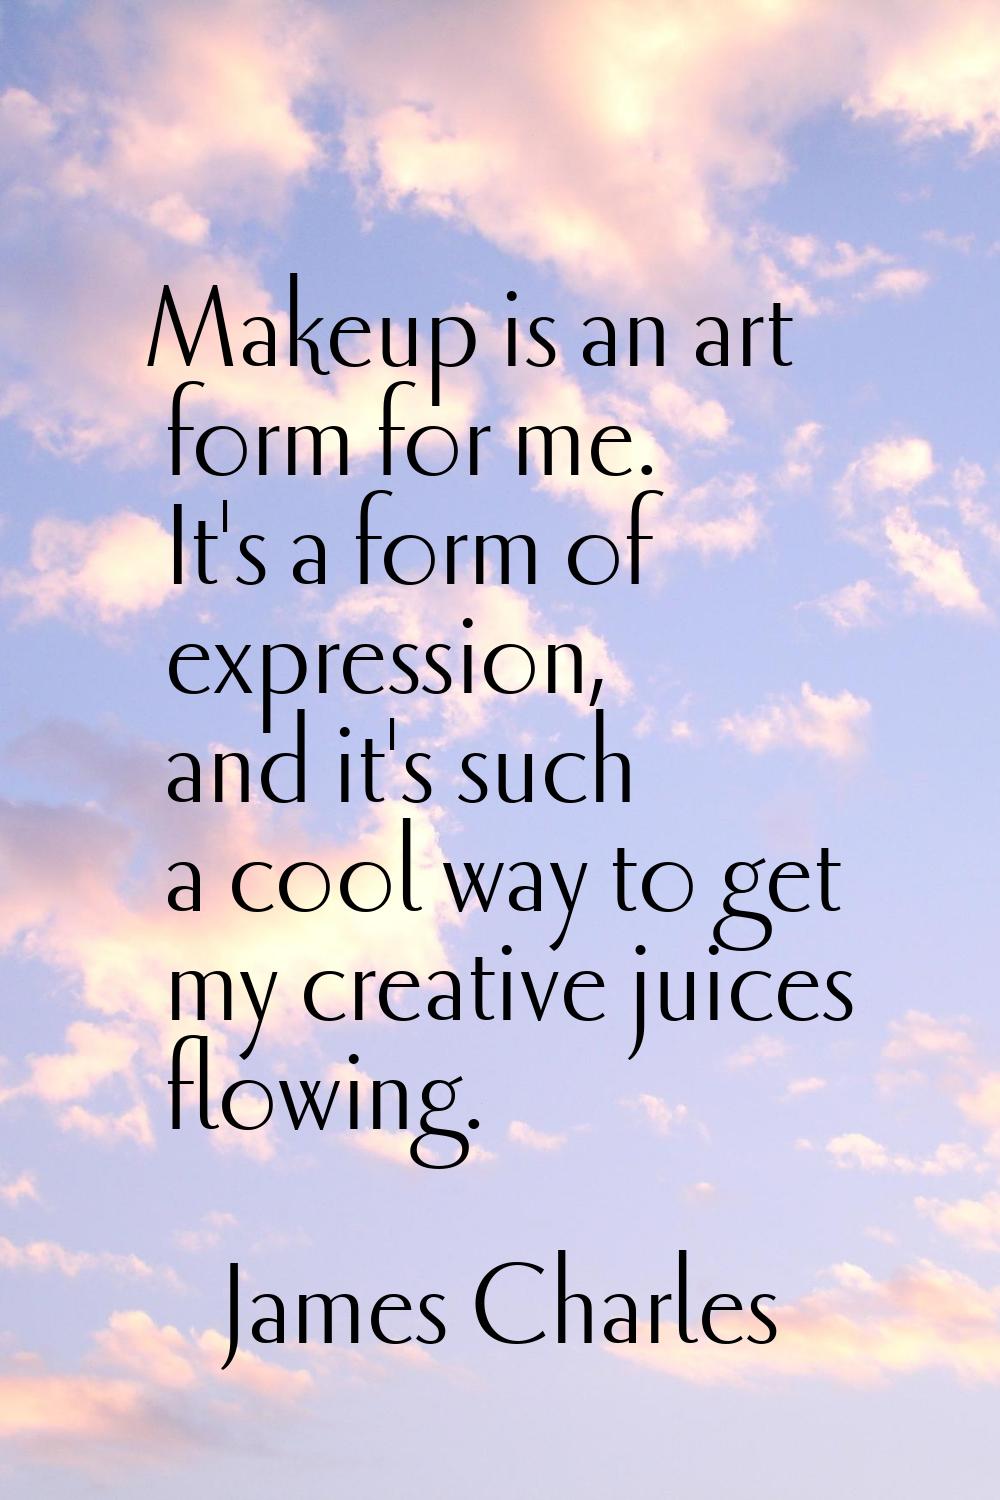 Makeup is an art form for me. It's a form of expression, and it's such a cool way to get my creativ